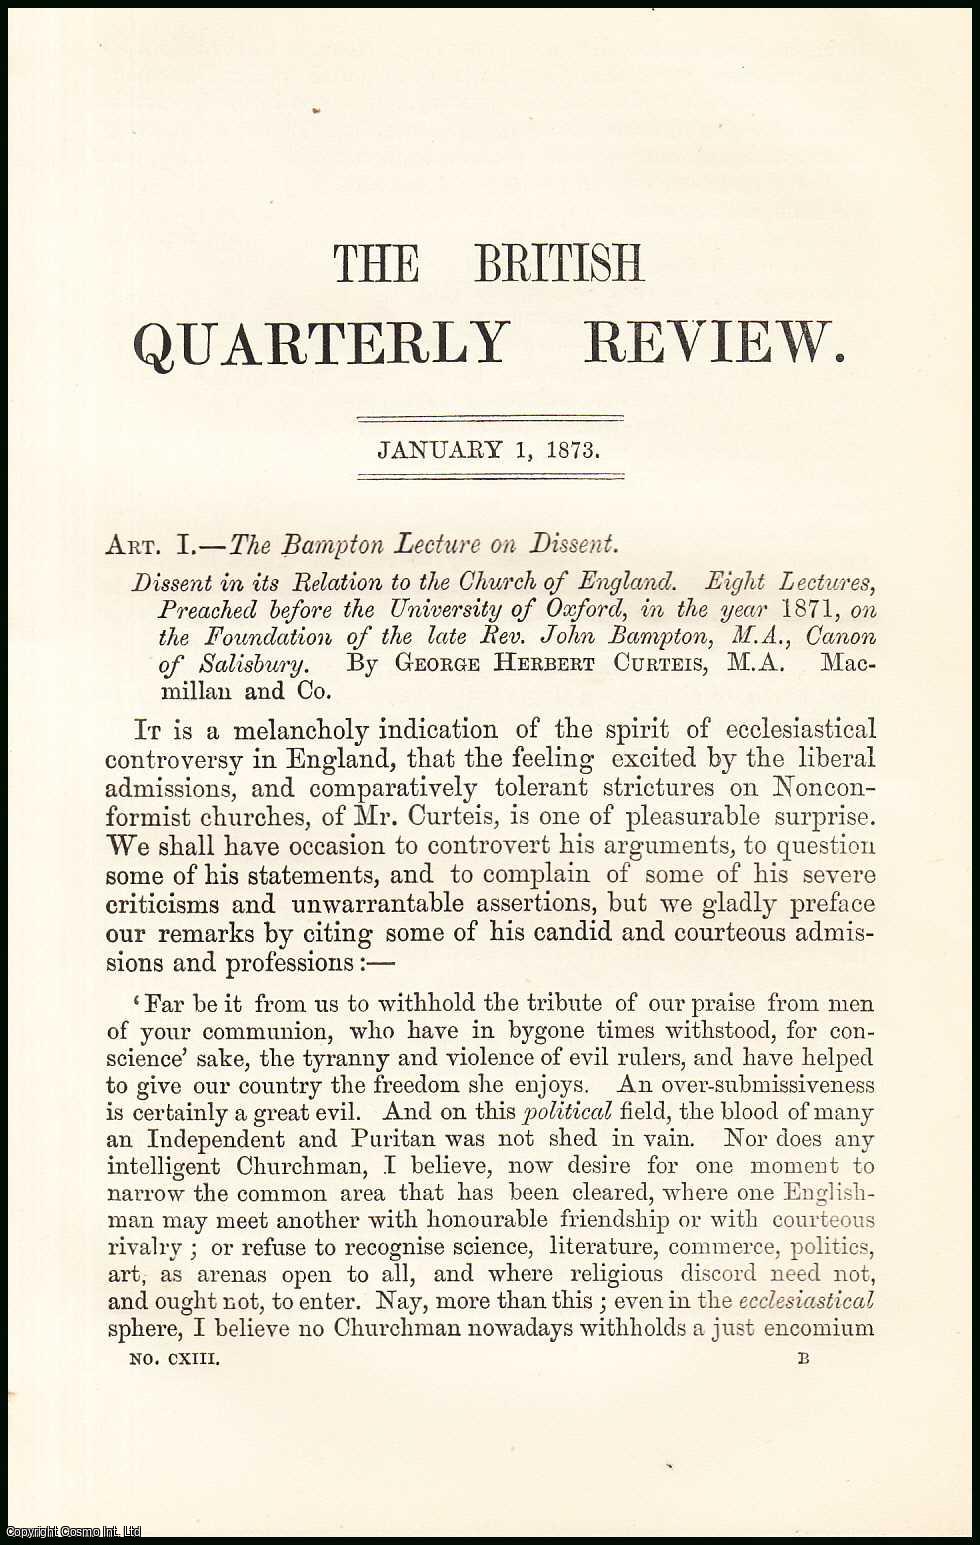 Author Unknown - The Bampton Lecture on Dissent : a review and summary of the 1871 lecture on its relation to the Church of England. A rare original article from the British Quarterly Review, 1873.